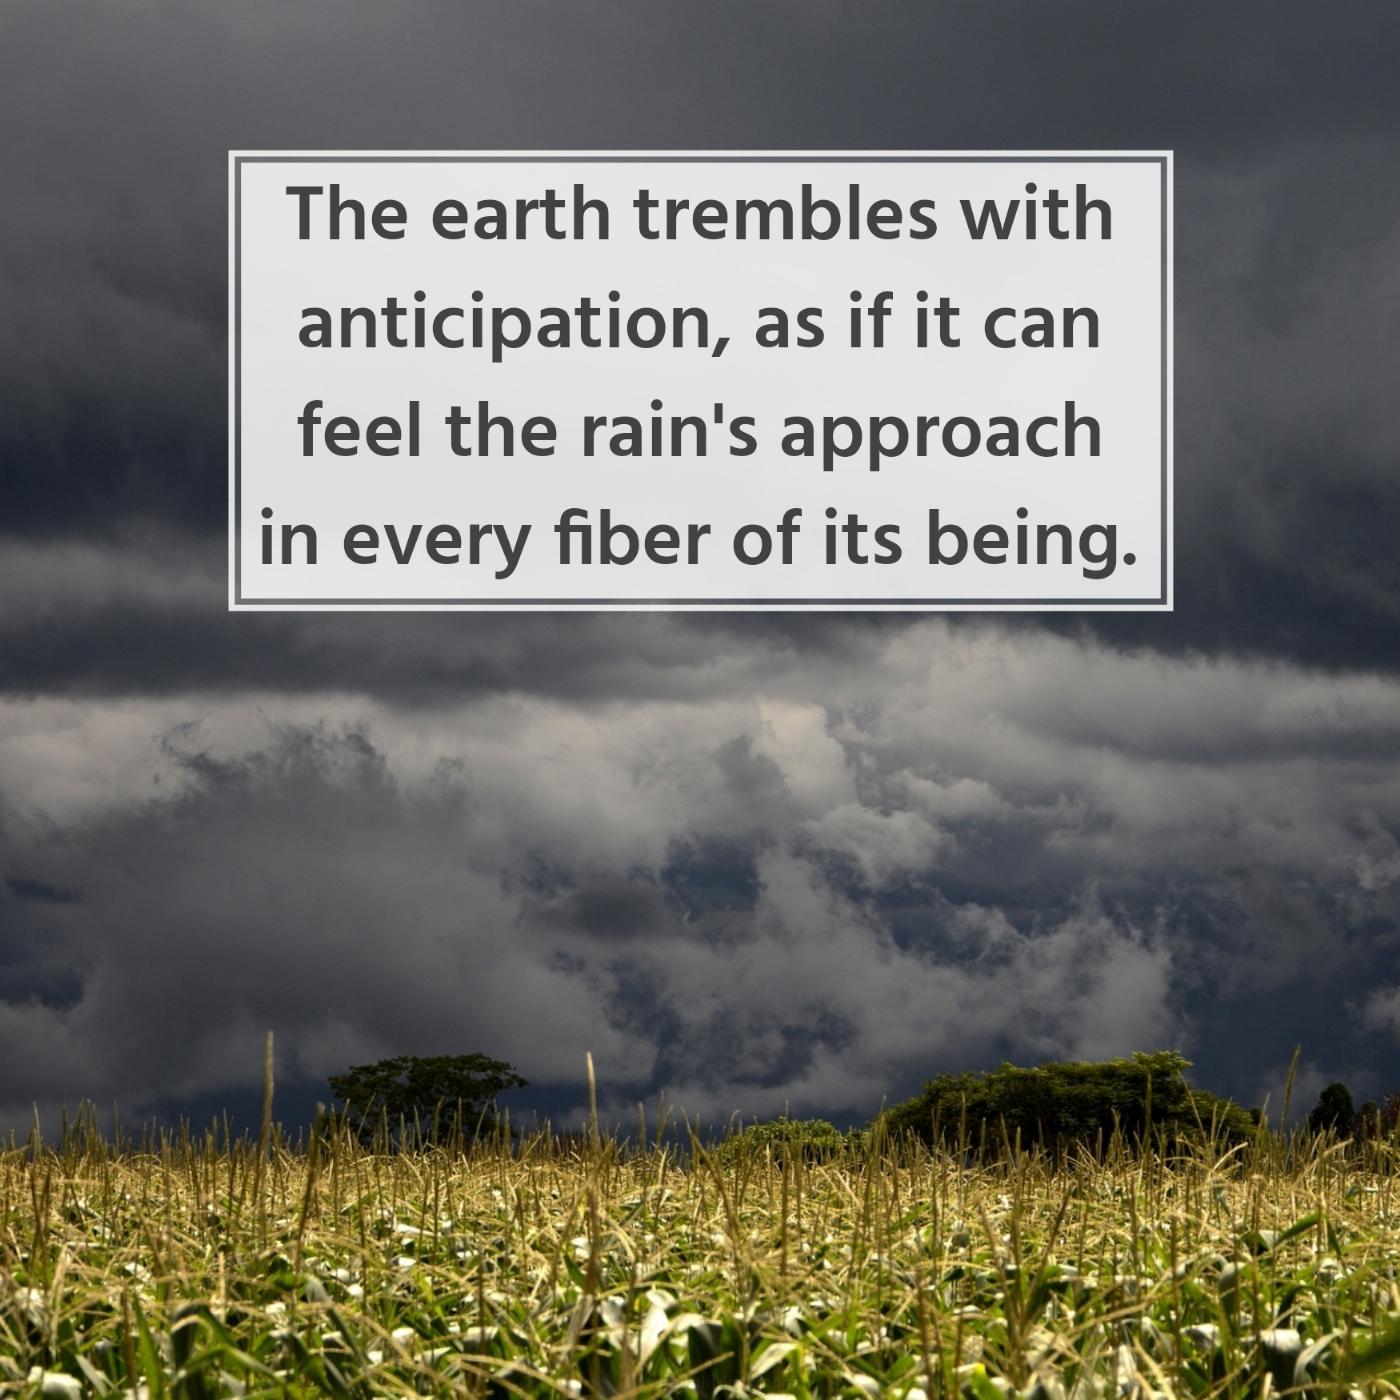 The earth trembles with anticipation as if it can feel the rain's approach